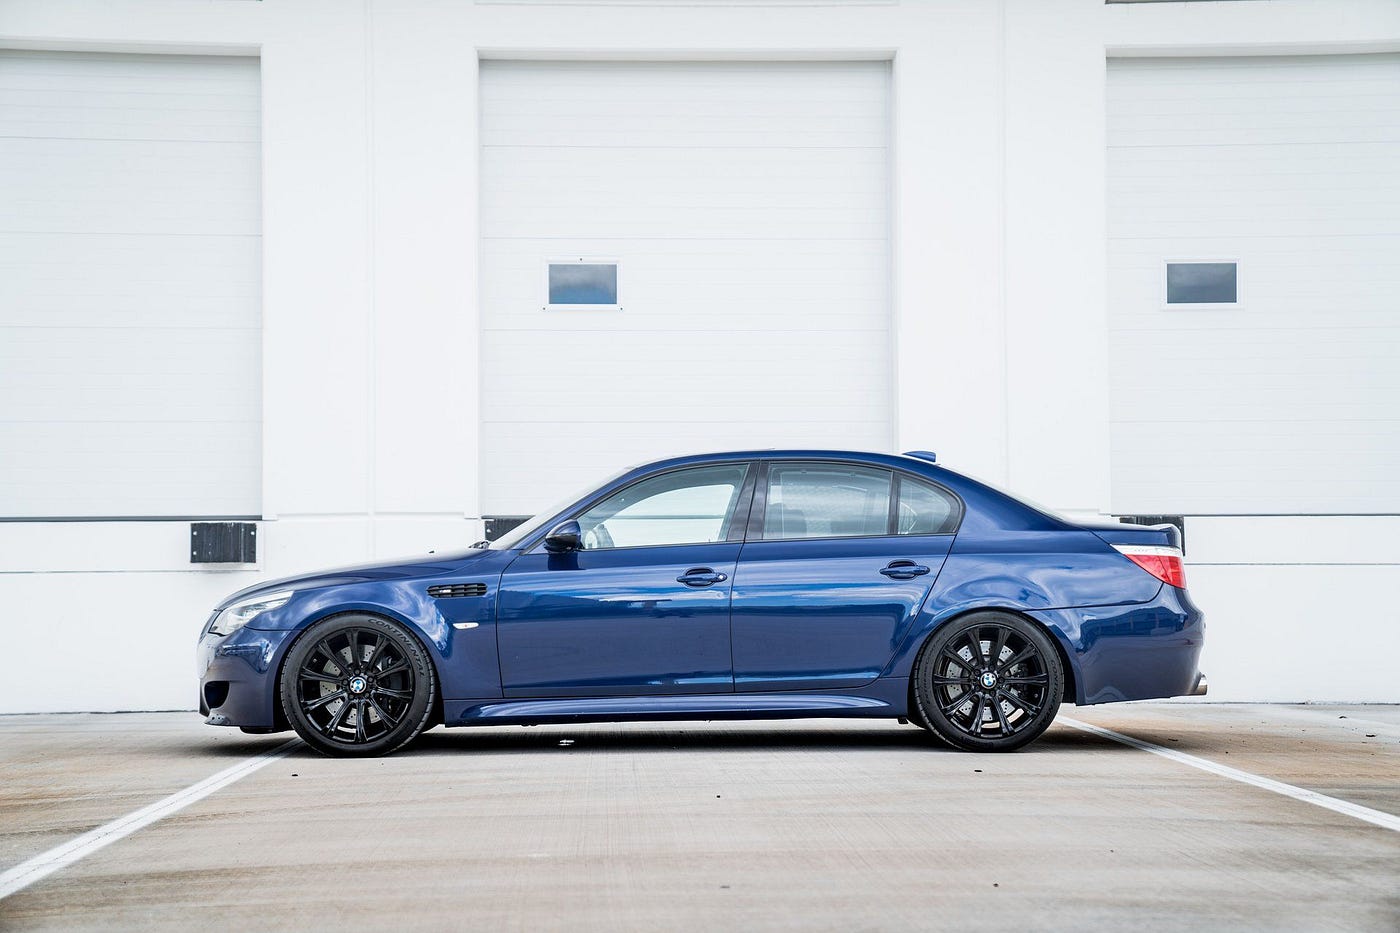 V10 With a Manual: 2010 BMW E60 M5, by Sam Maven, Motorious